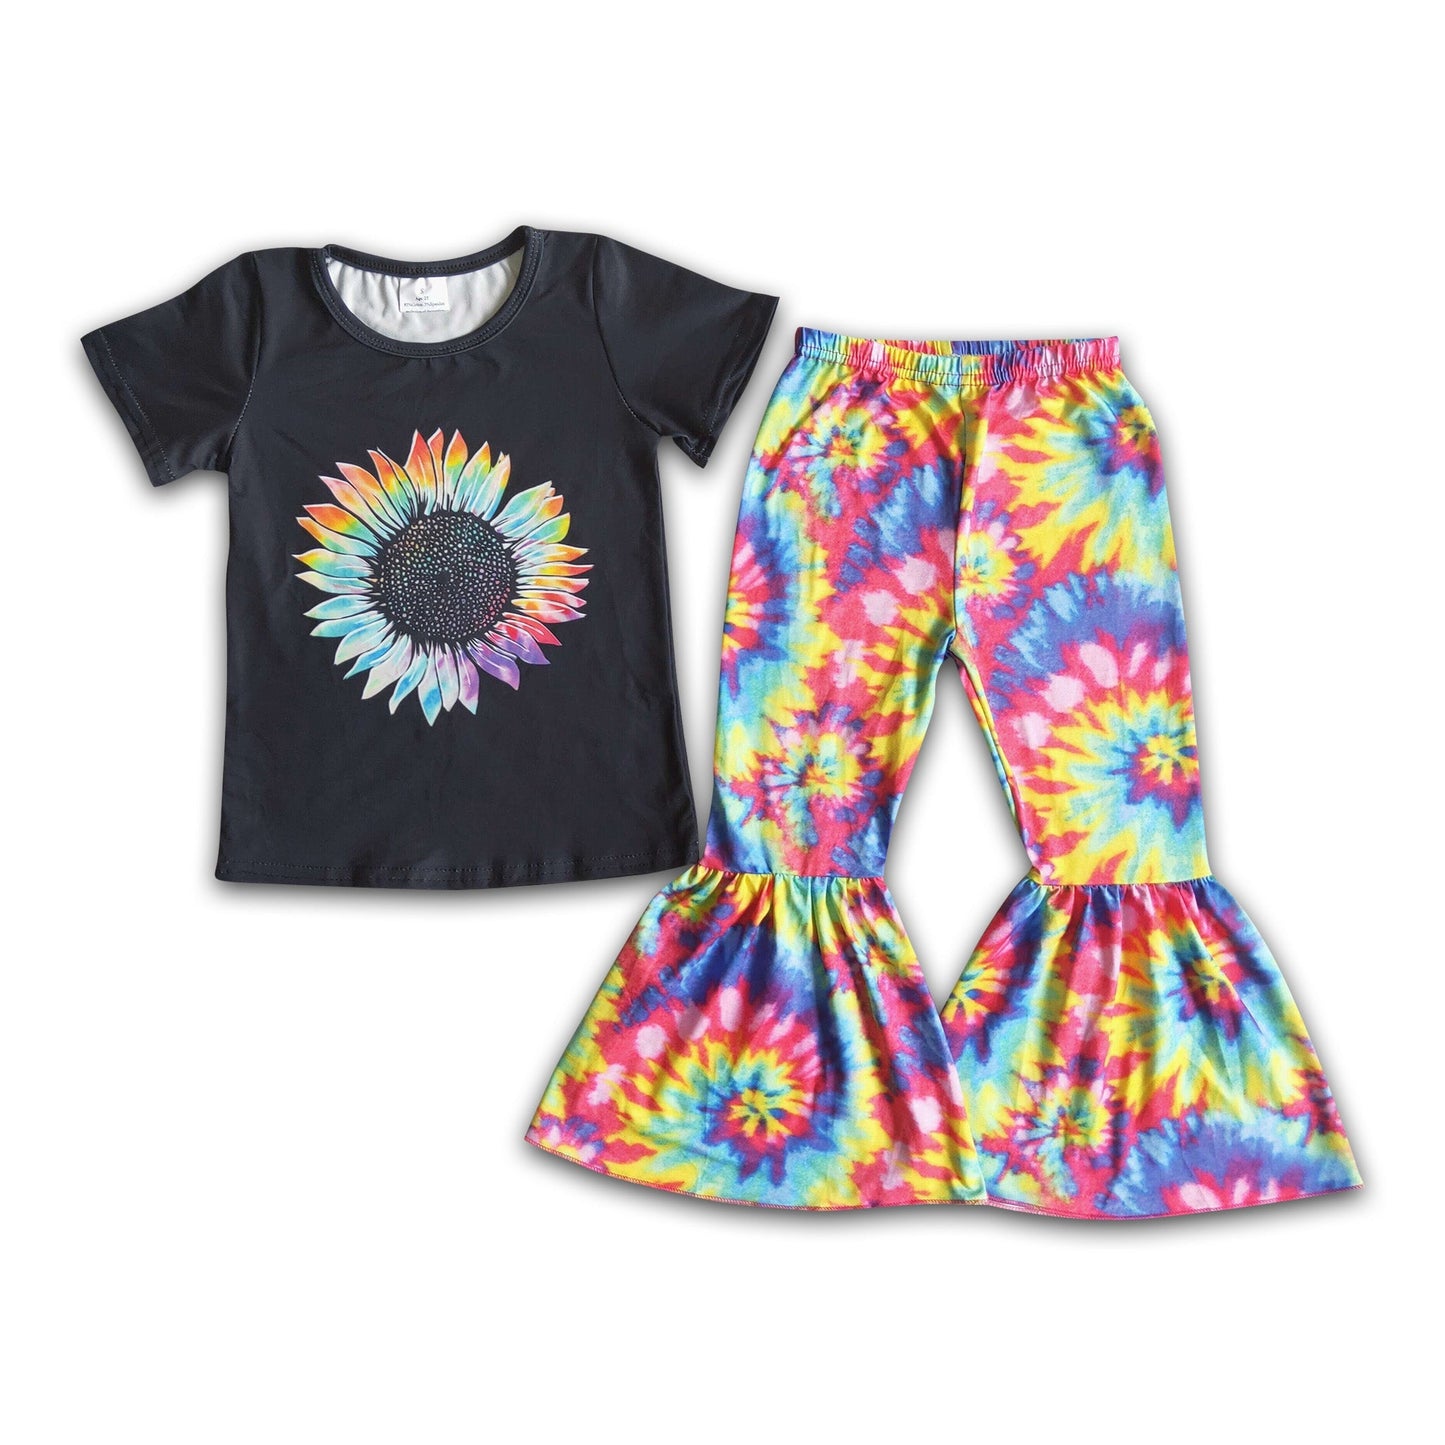 Girl Tie Dye Sunflowers Outfit